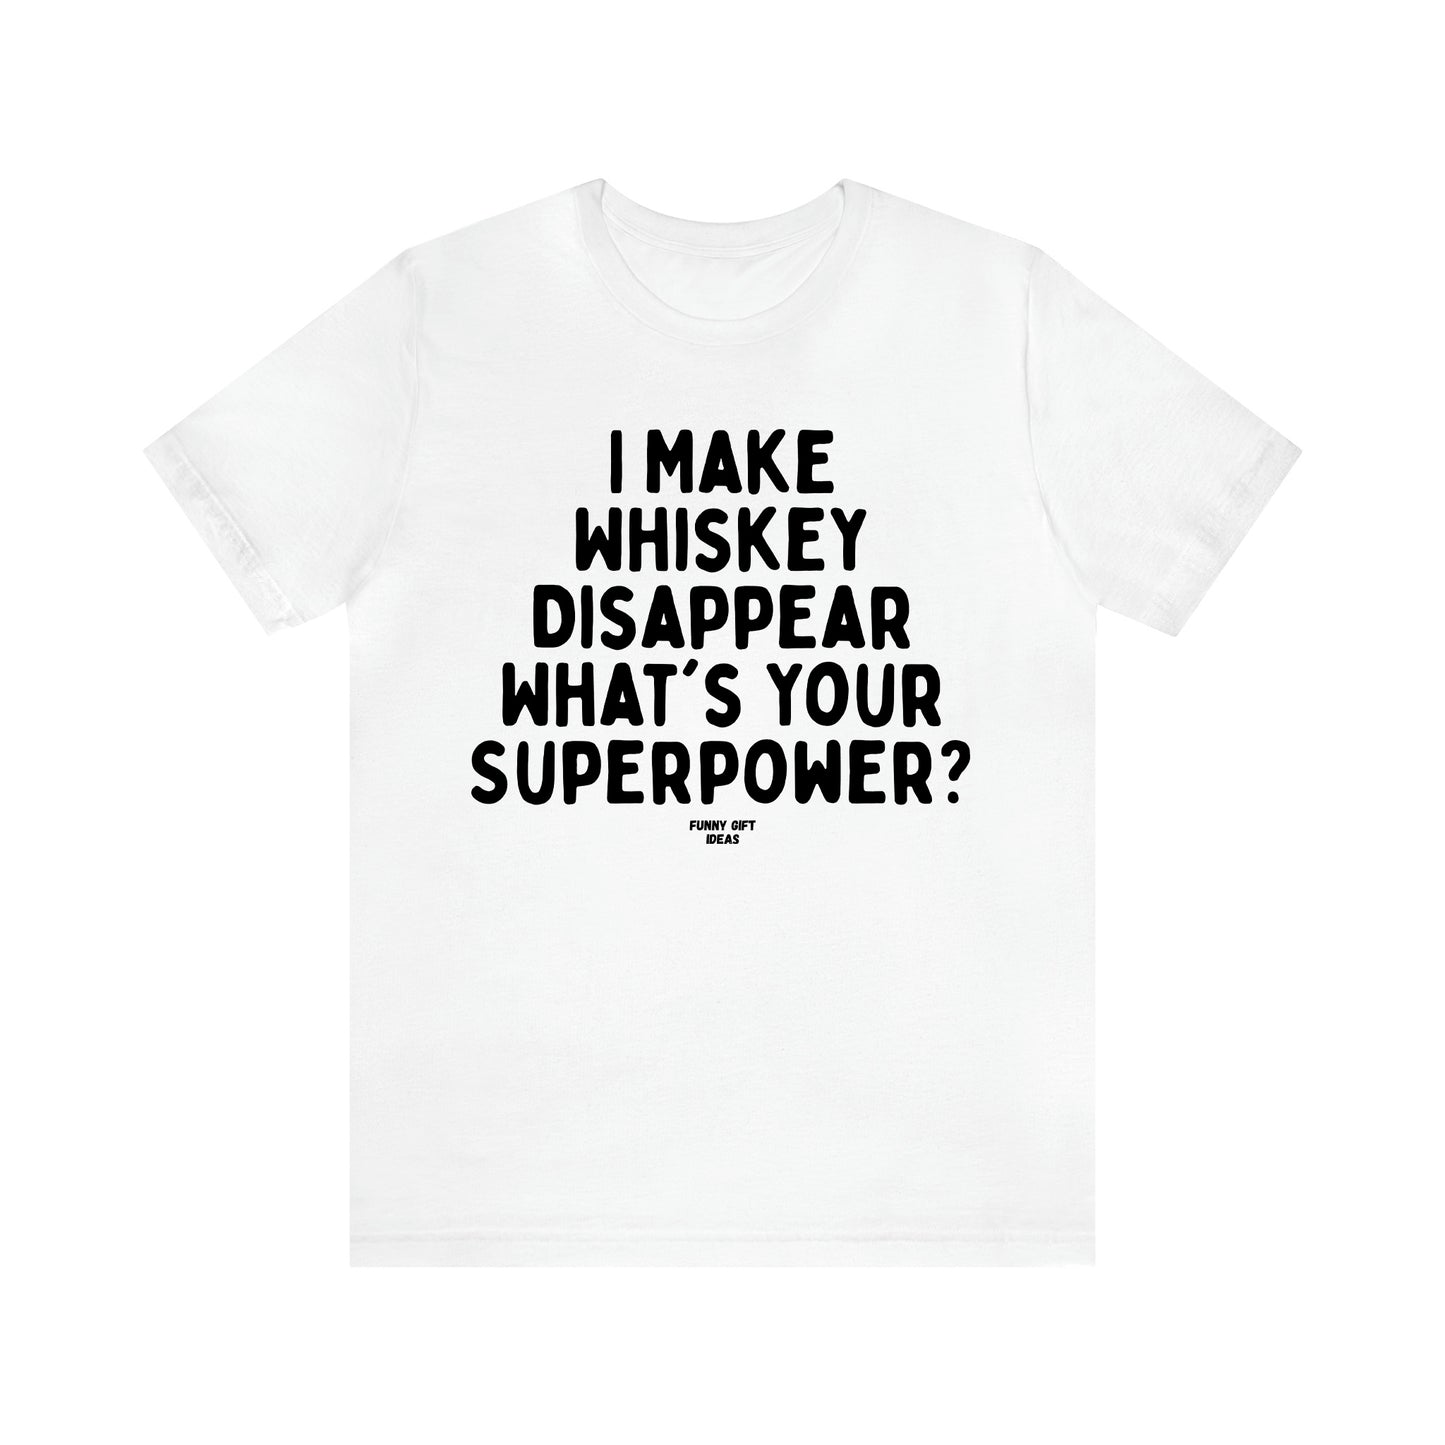 Women's T Shirts I Make Whiskey Disappear What's Your Superpower? - Funny Gift Ideas